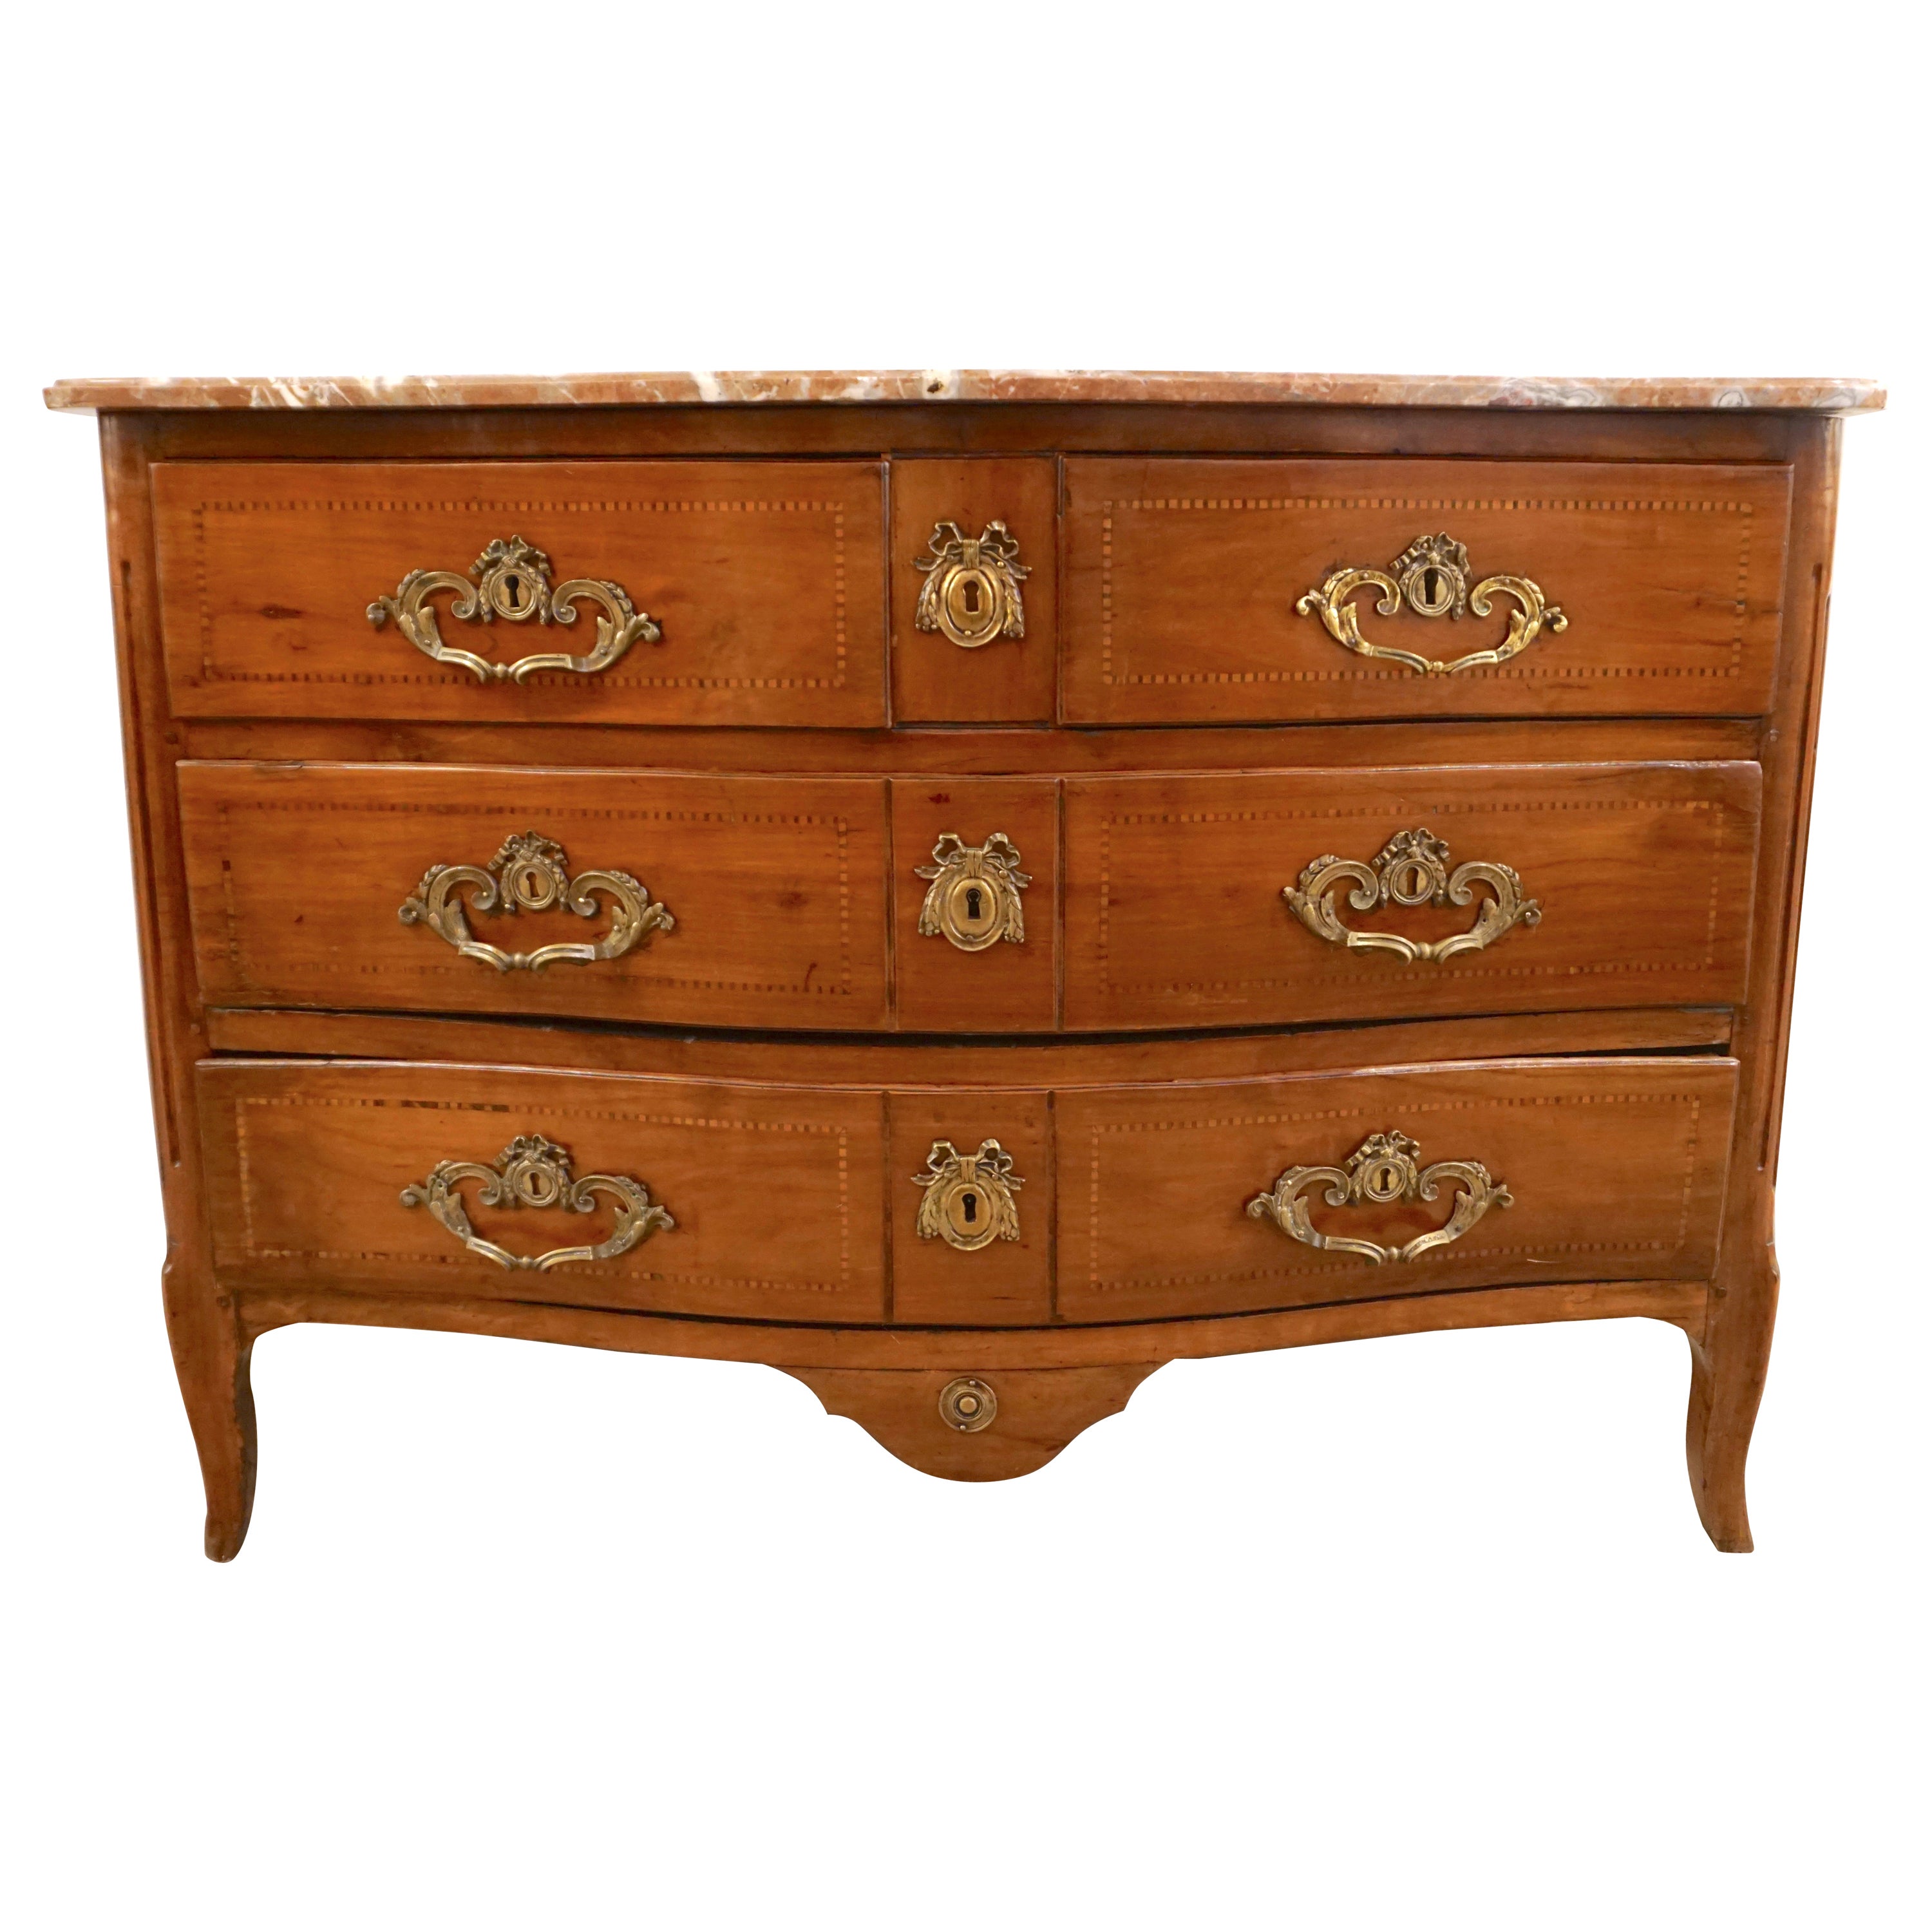 18th-Century French Bow Front Marquetry Walnut & Marble Top Provincial Commode